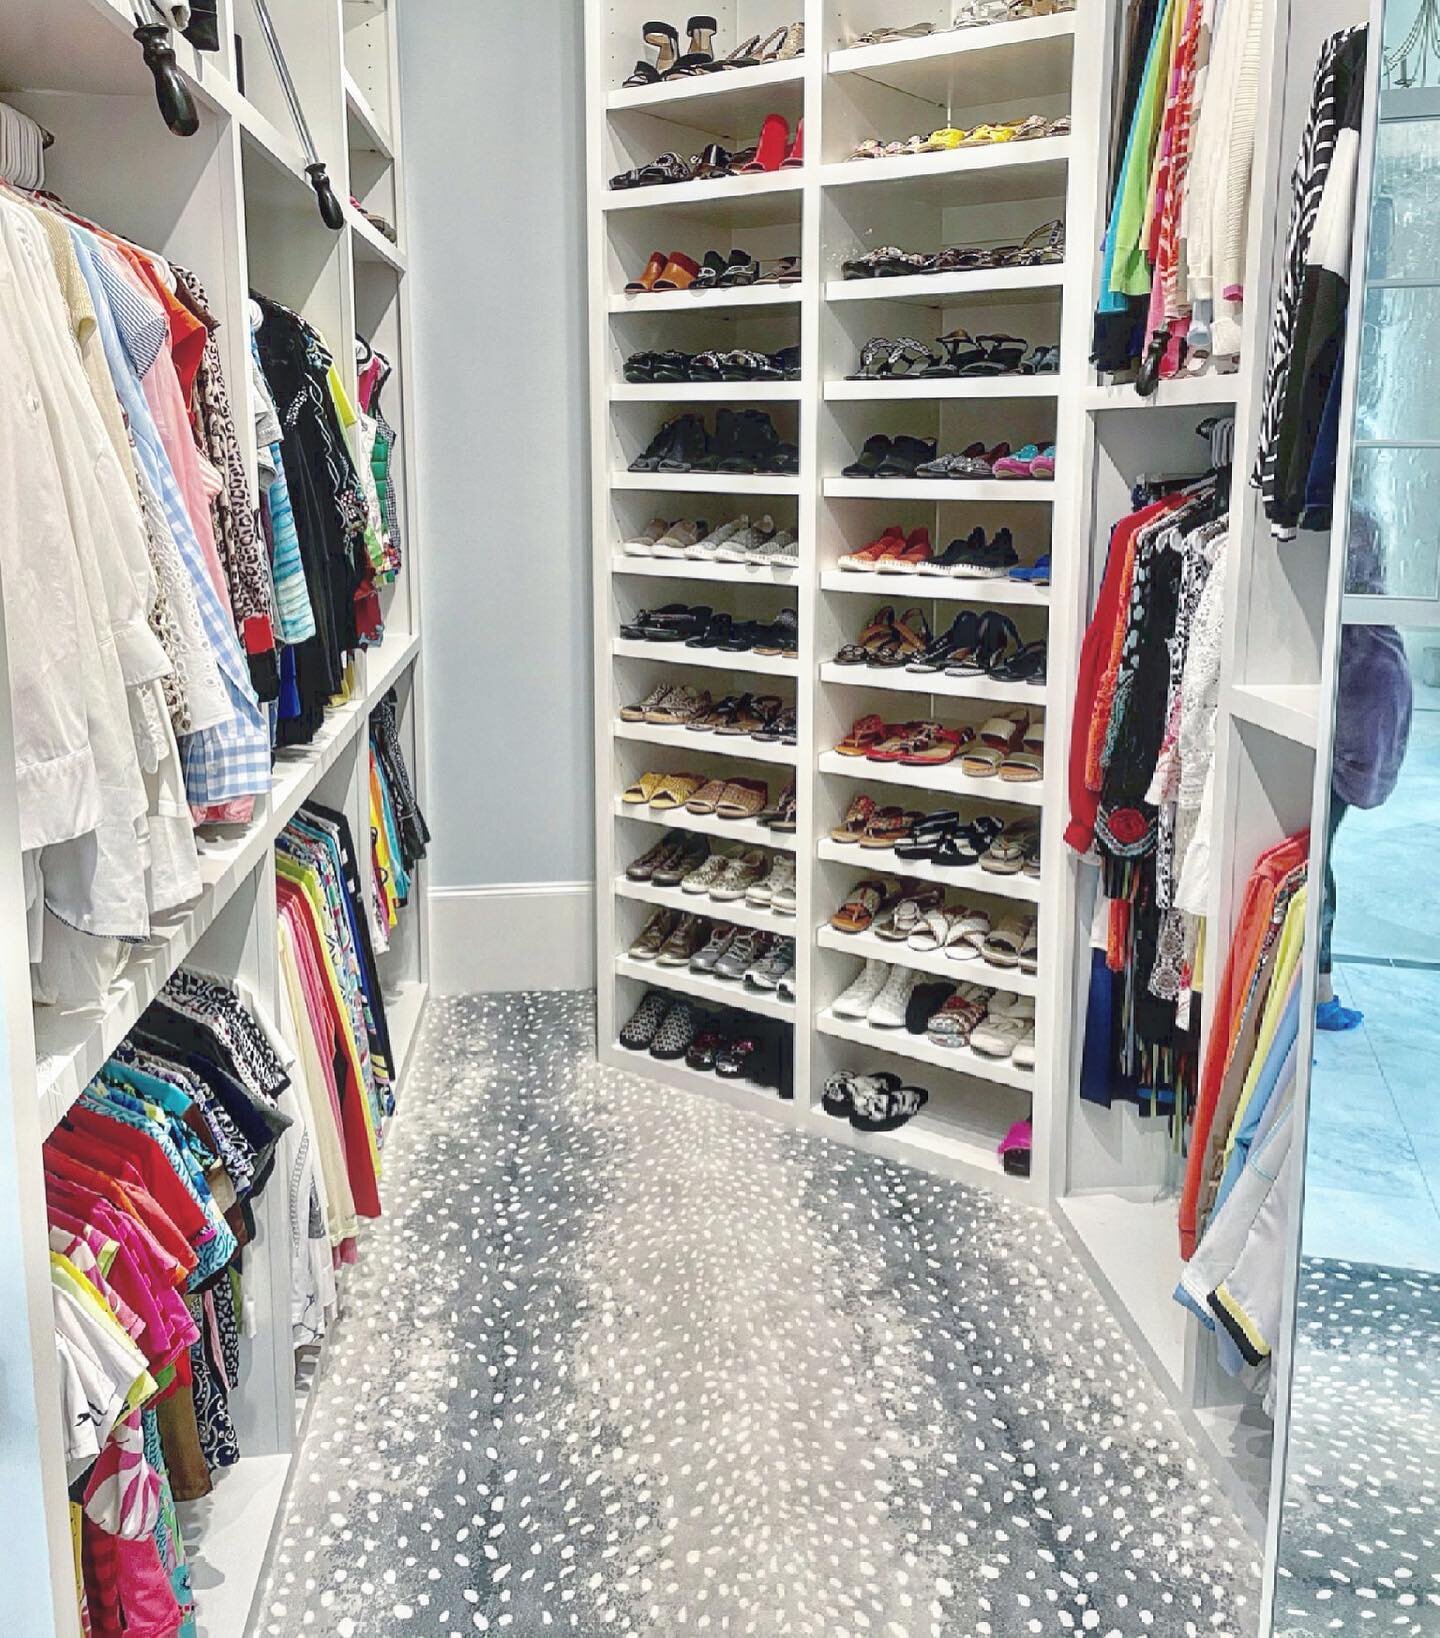 Well, color me pretty this closet is a beauty! Happy Friday! ❤️🧡💛💚💙💜
.
.
#crosswellorganizing #closet #organization #closetorganization #home #organize #wardrobe #colorful #colorfulwardrobe #shoes #shoeshelves #colorcoded